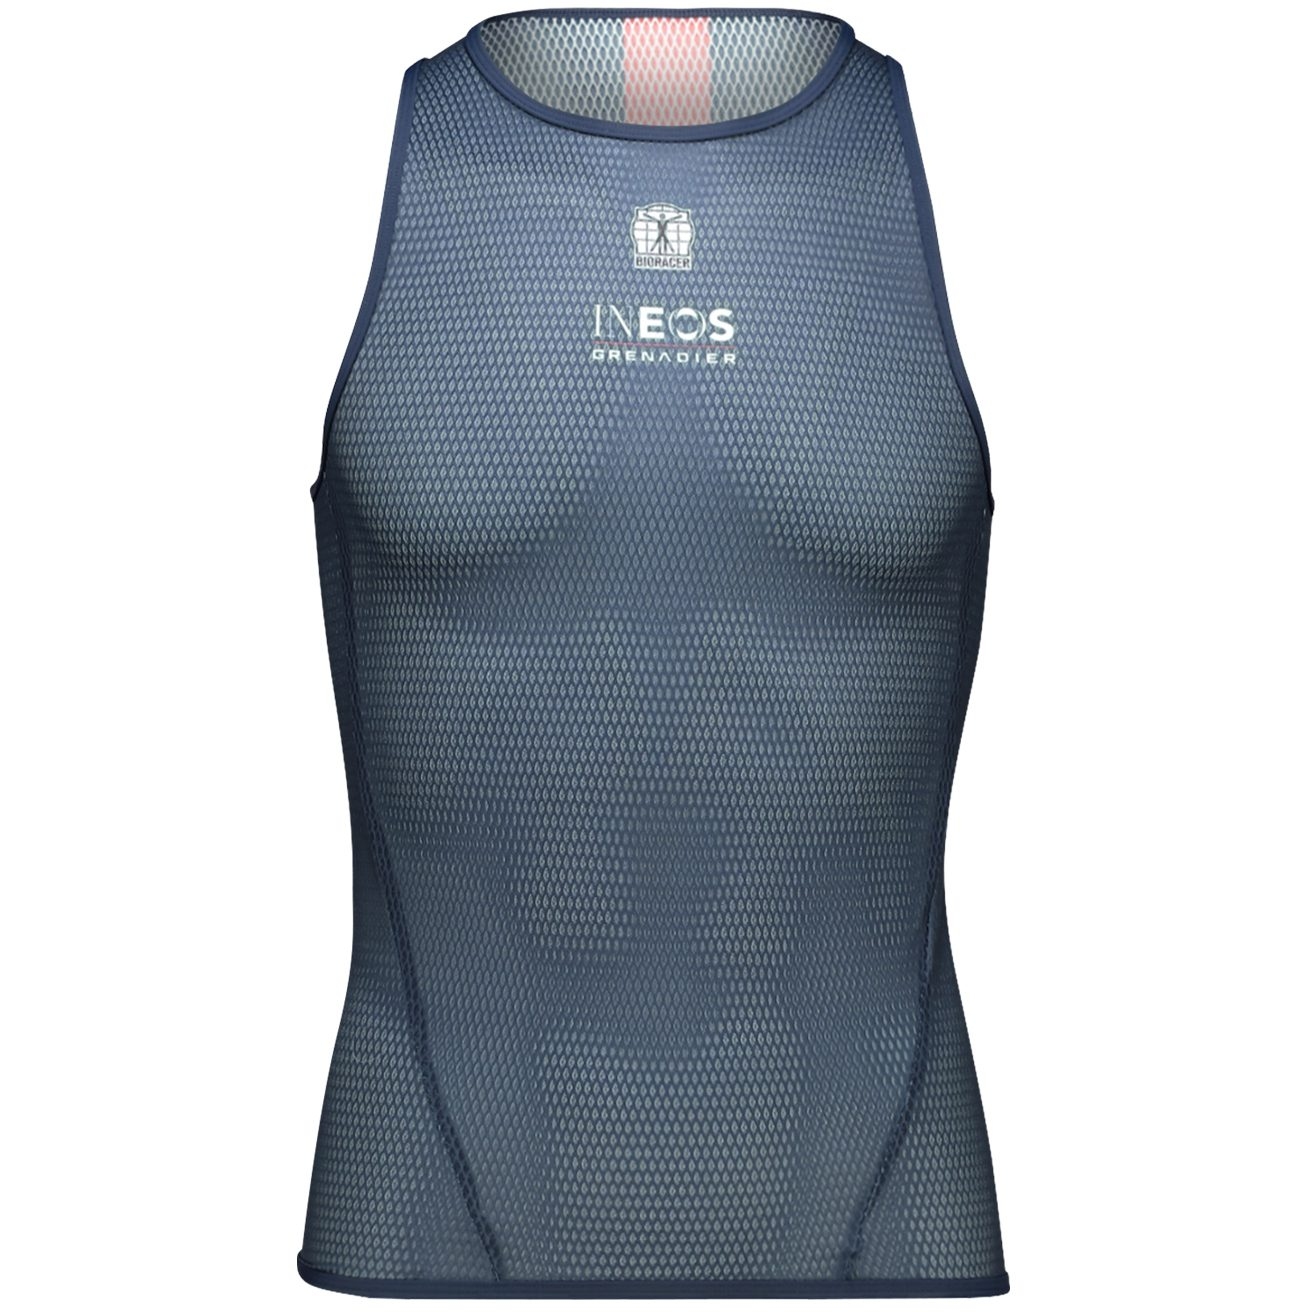 Picture of Bioracer Ineos Grenadiers Sleeveless Breeze Base Layer Undershirt - navy blue/red